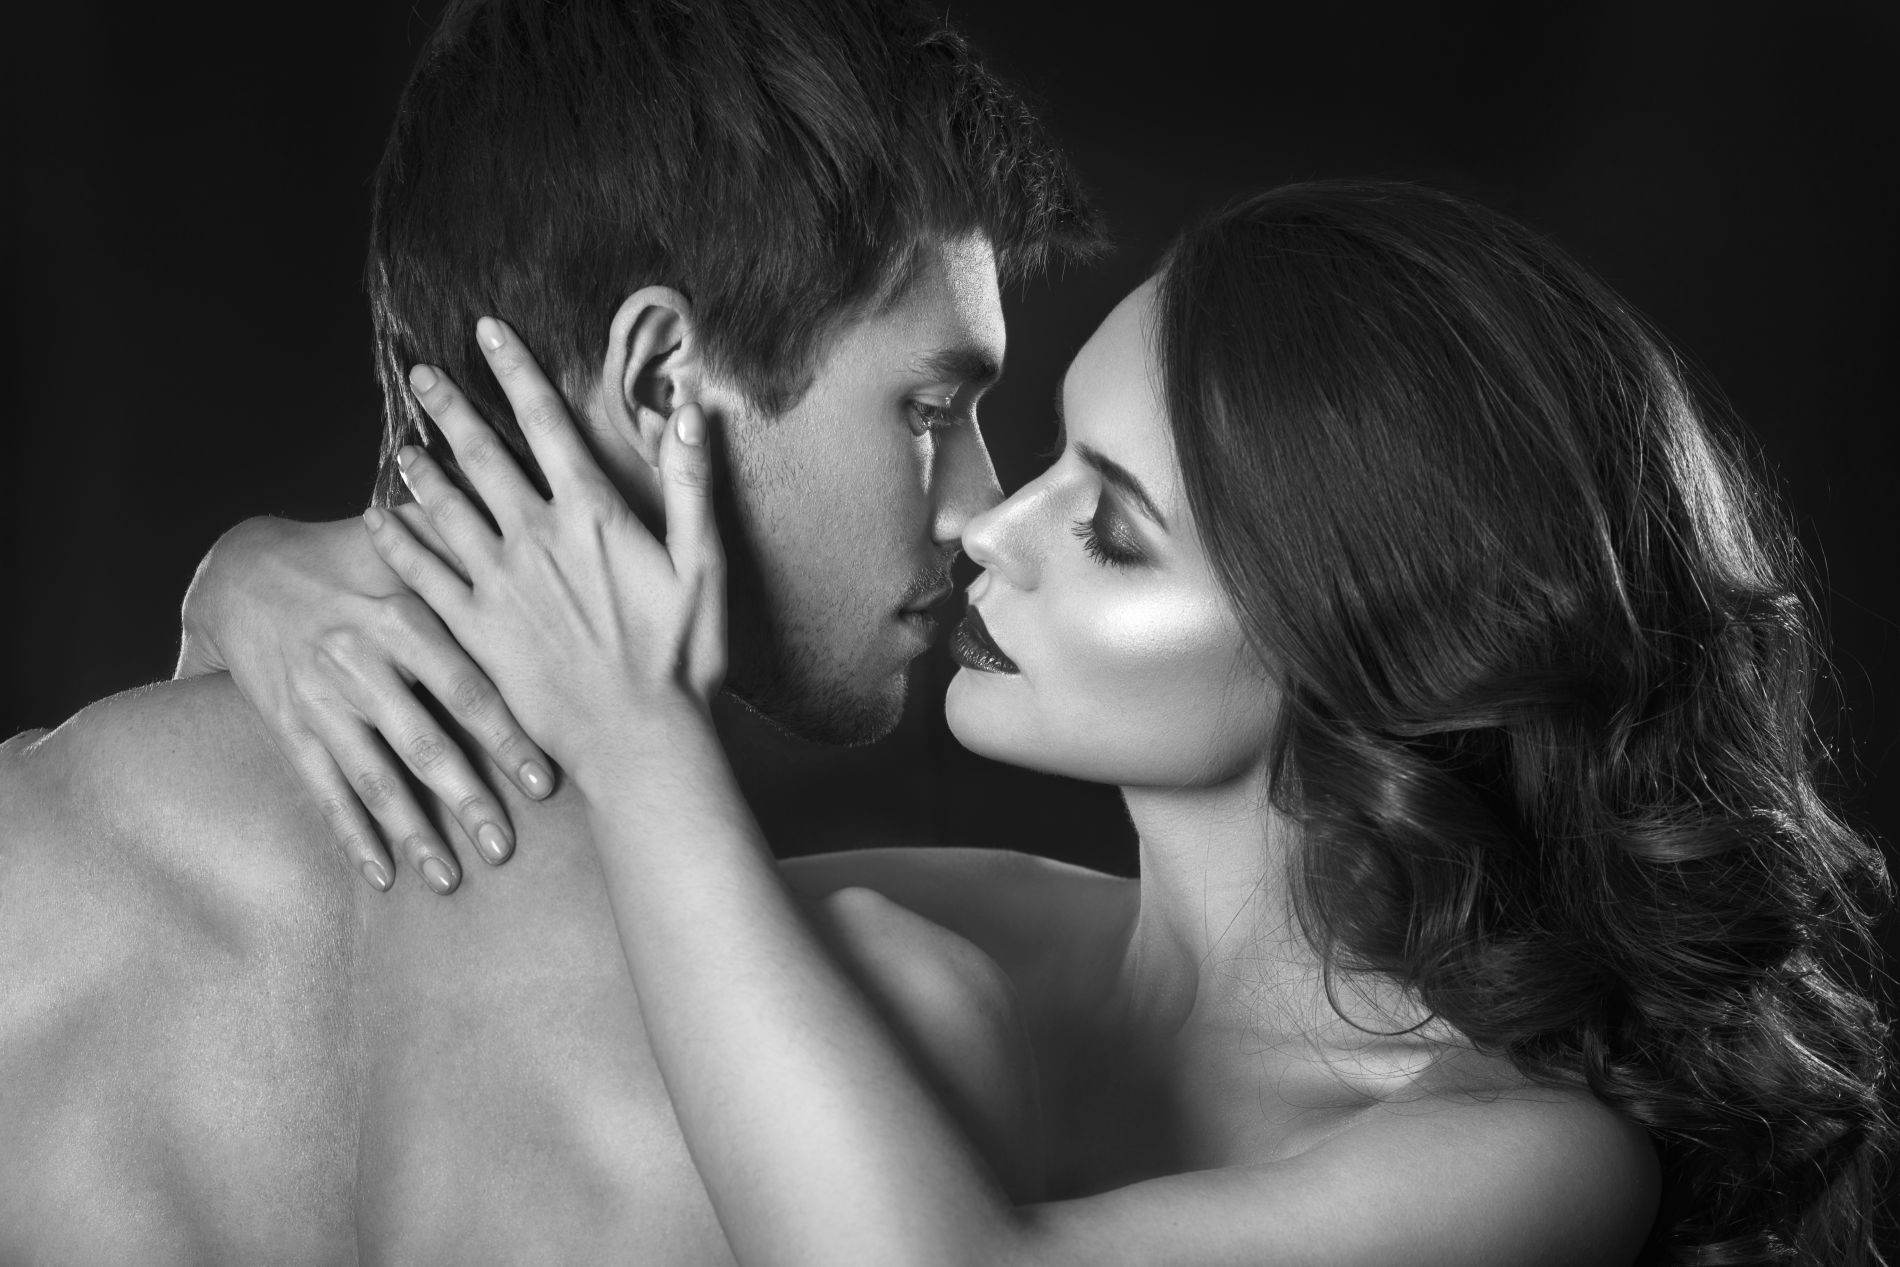 Woman and man about to kiss. The woman is a cuckoldress: She is about to kiss her lover and is confident about it.